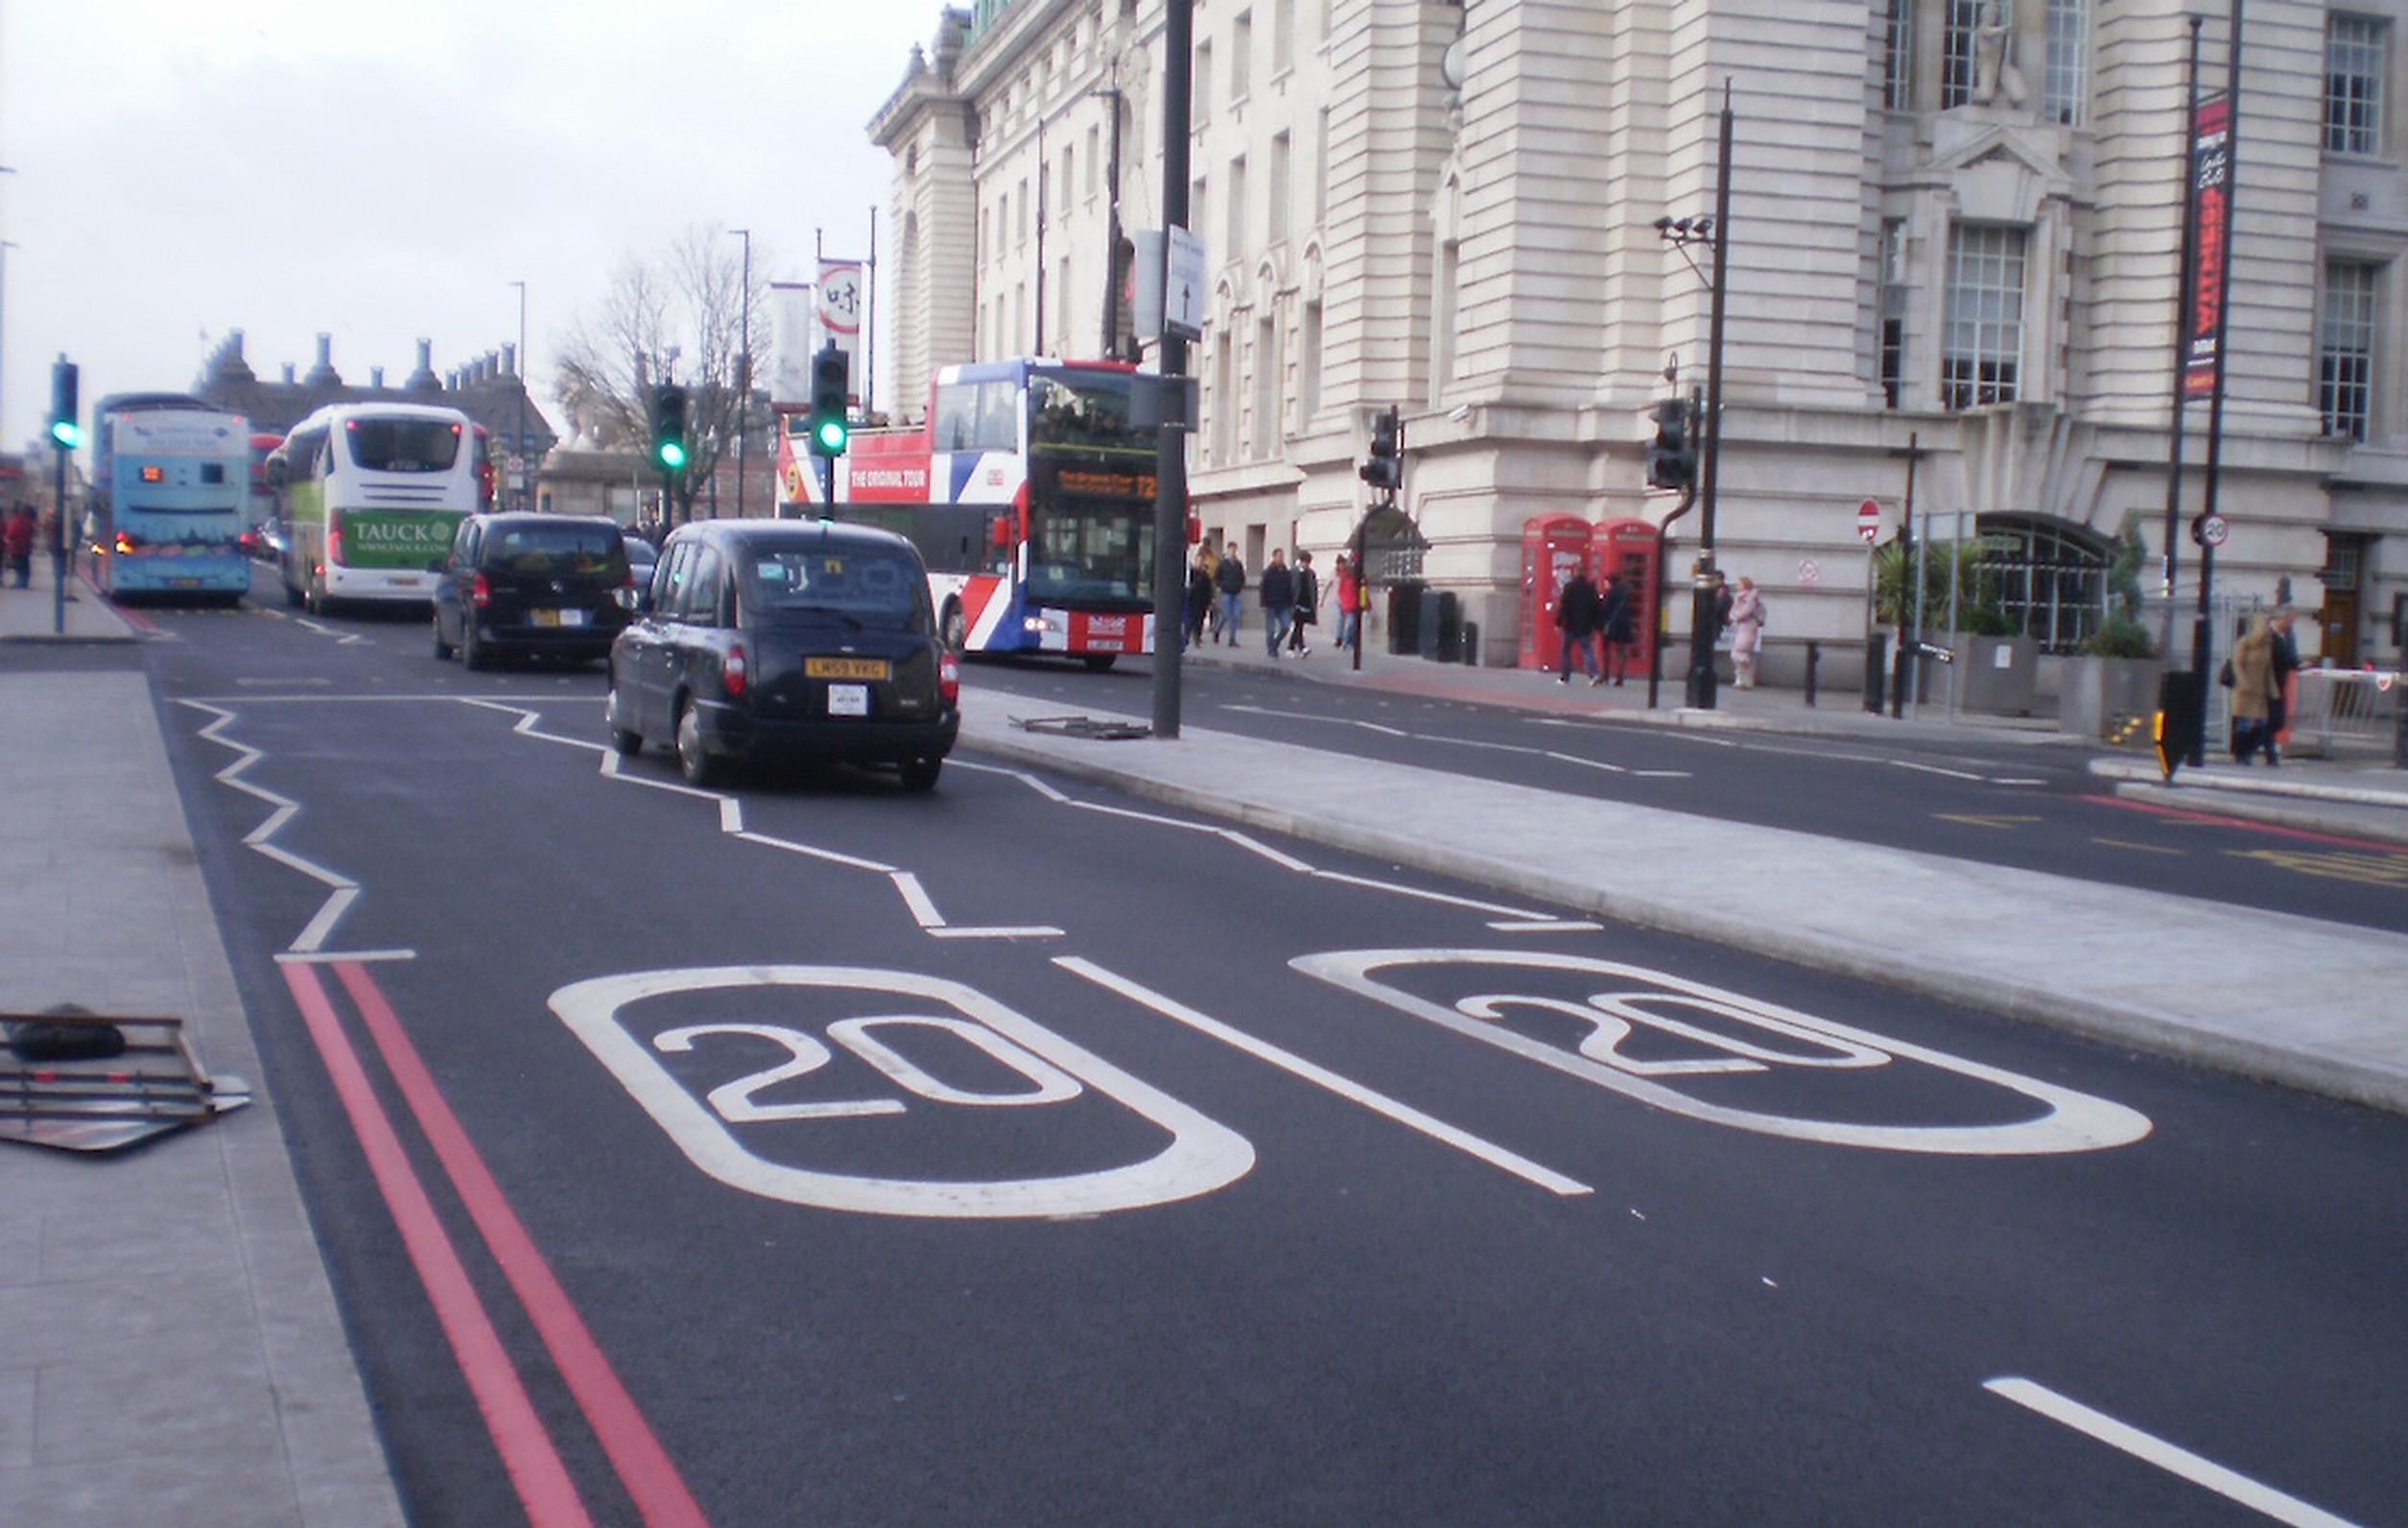 20mph road markings act as a `clear reminder` to drivers, said Kensington & Chelsea Council